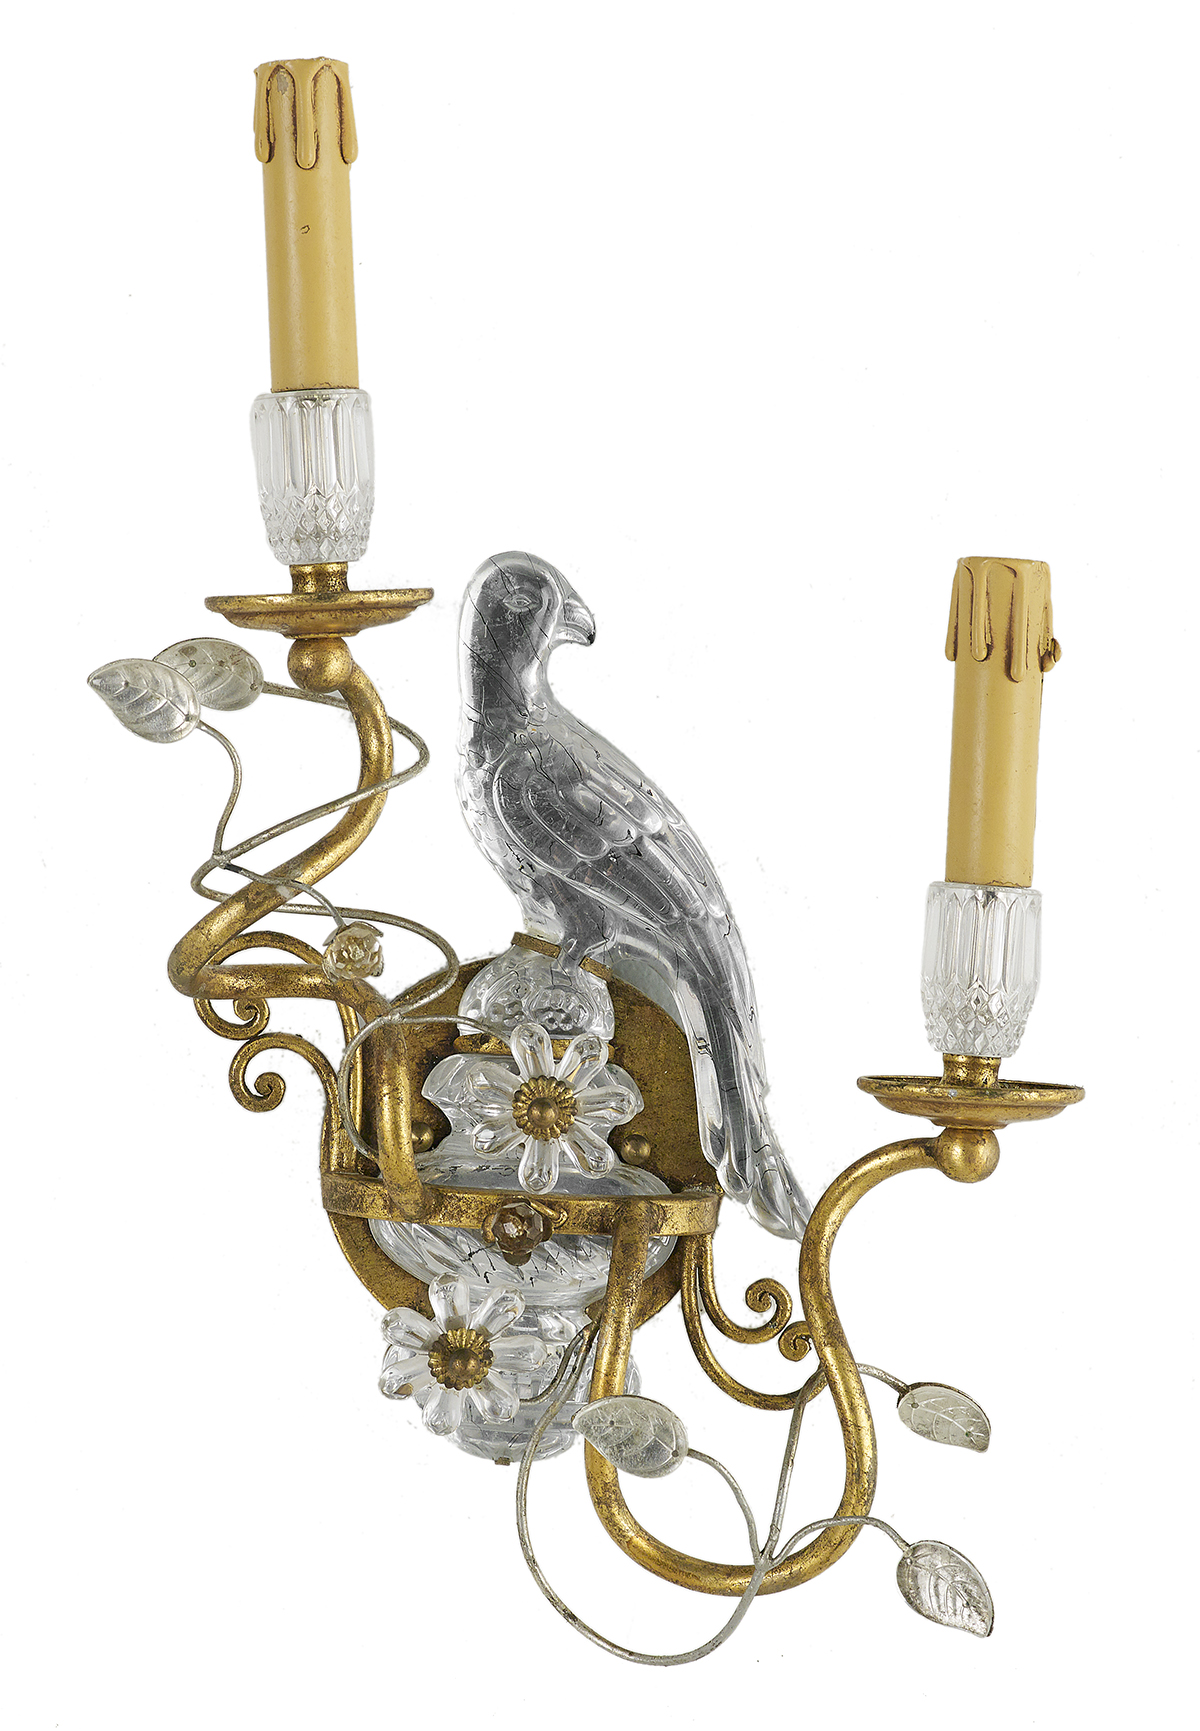 Pair of French Bagues-Style Rock Sconces - Image 3 of 3